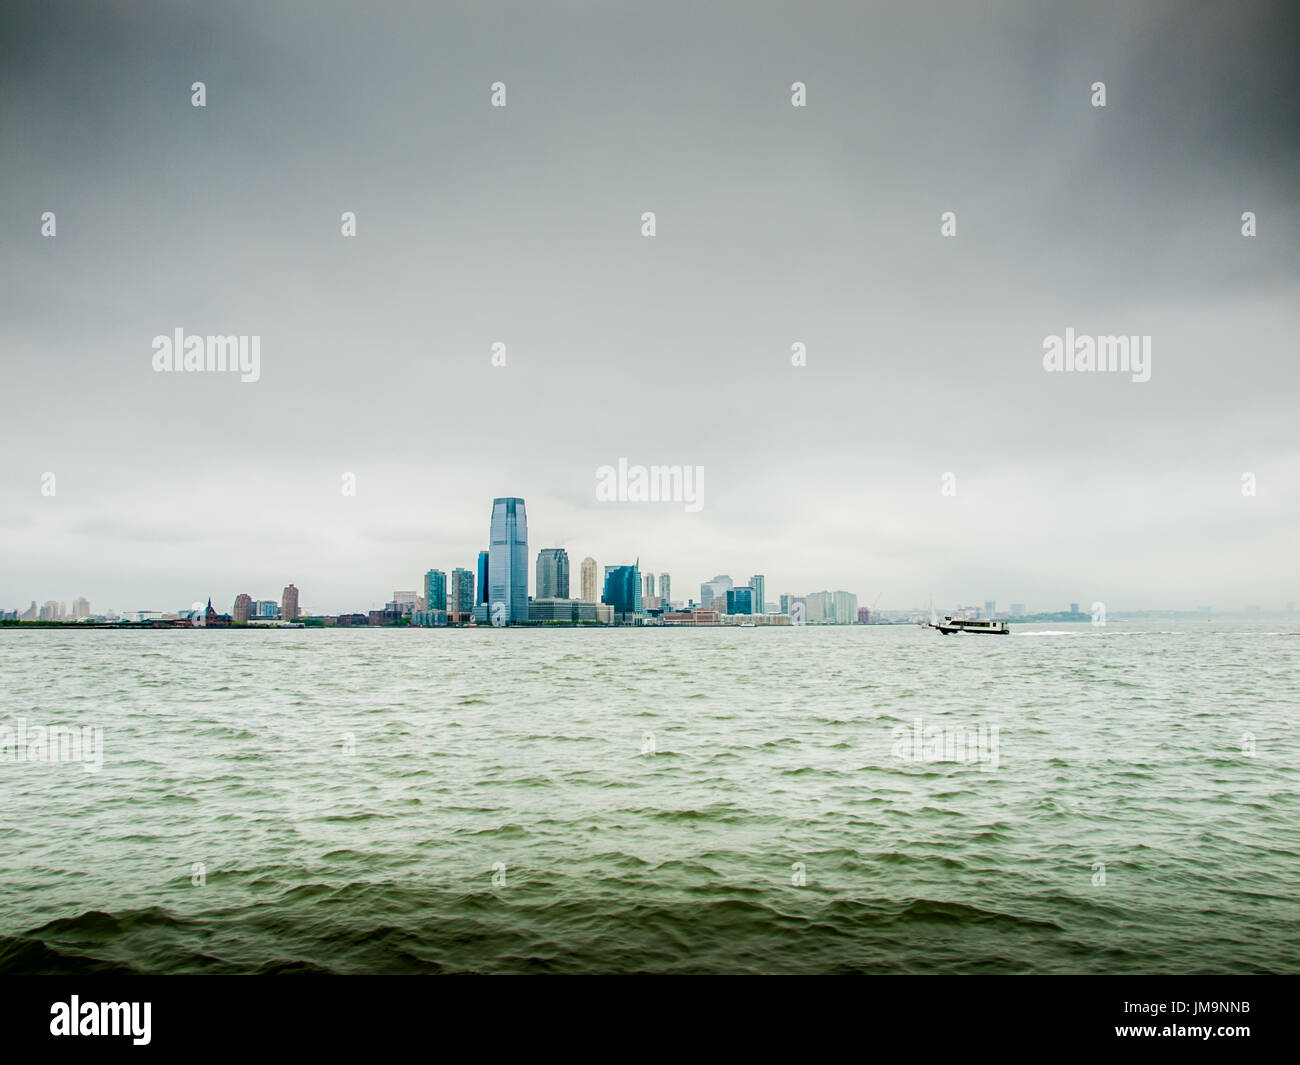 Distant Manhattan Island on a cloudy day Stock Photo